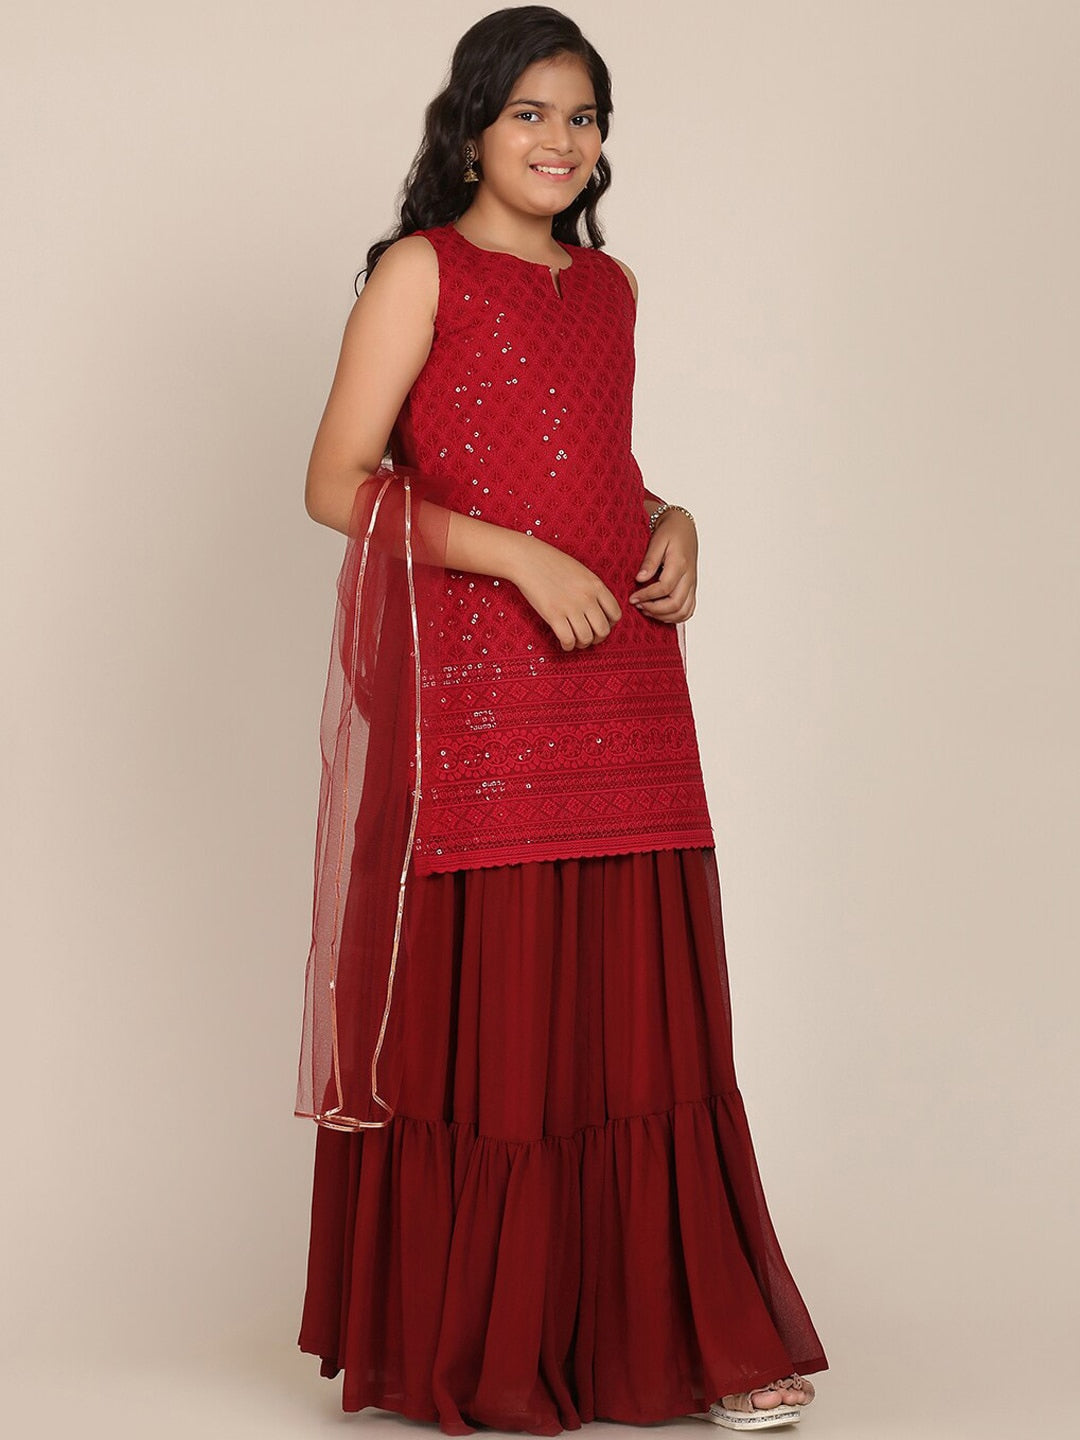 Girls Maroon Floral Embroidered Sequinned Kurti with Skirt & With Dupattawomensfashionfun